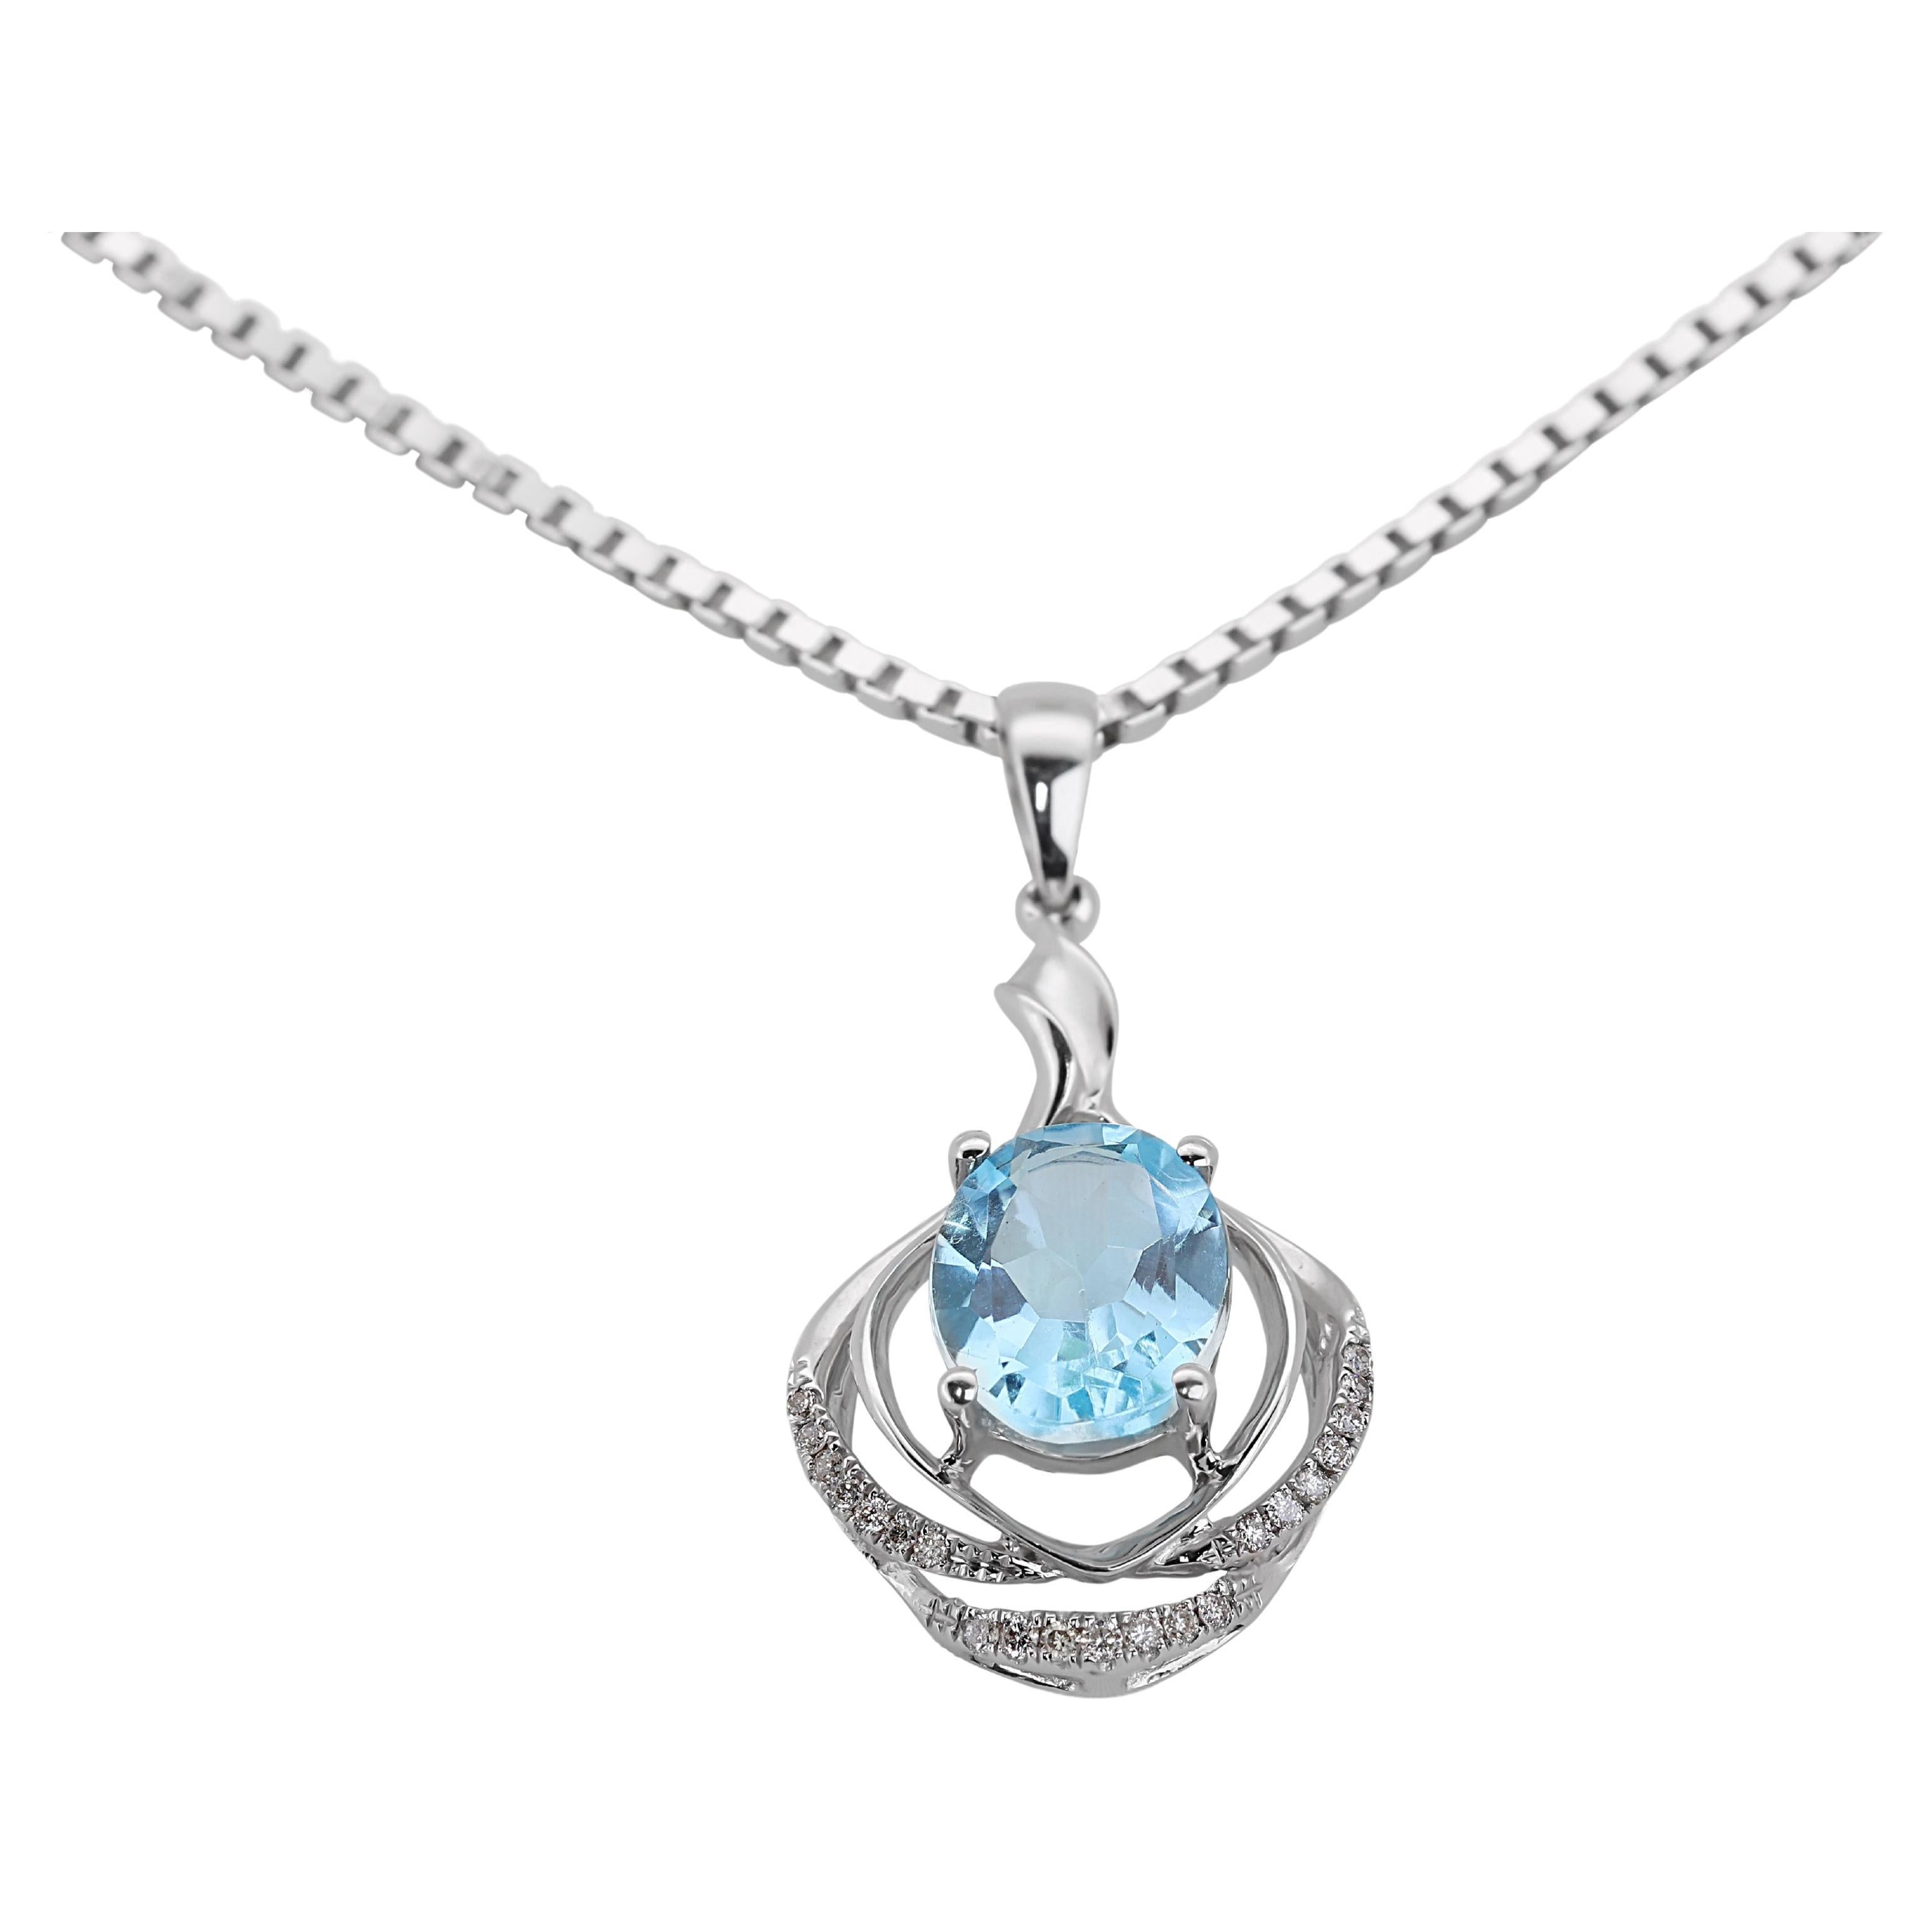 Stunning 10k White Gold Necklace with 3.16 Ct Natural Diamonds and Topaz